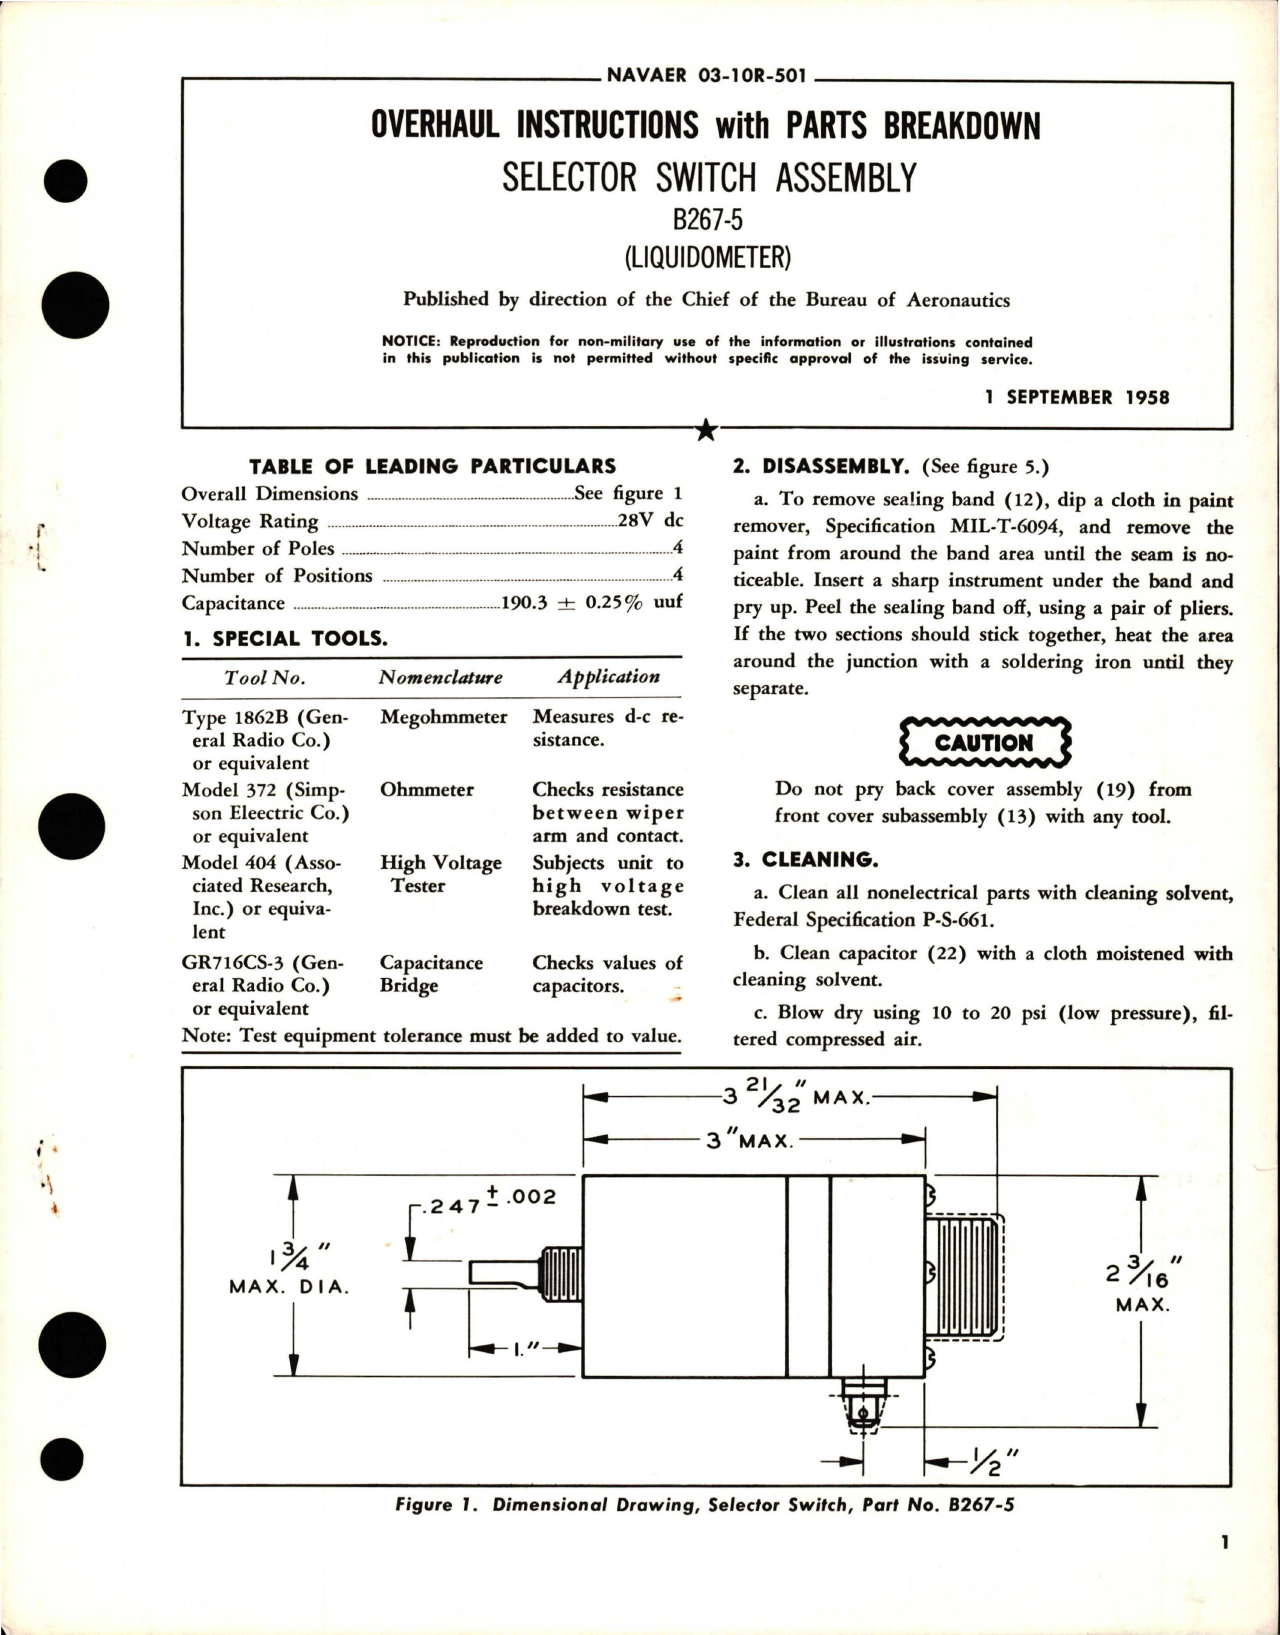 Sample page 1 from AirCorps Library document: Overhaul Instructions with Parts Breakdown for Selector Switch Assembly - B267-5